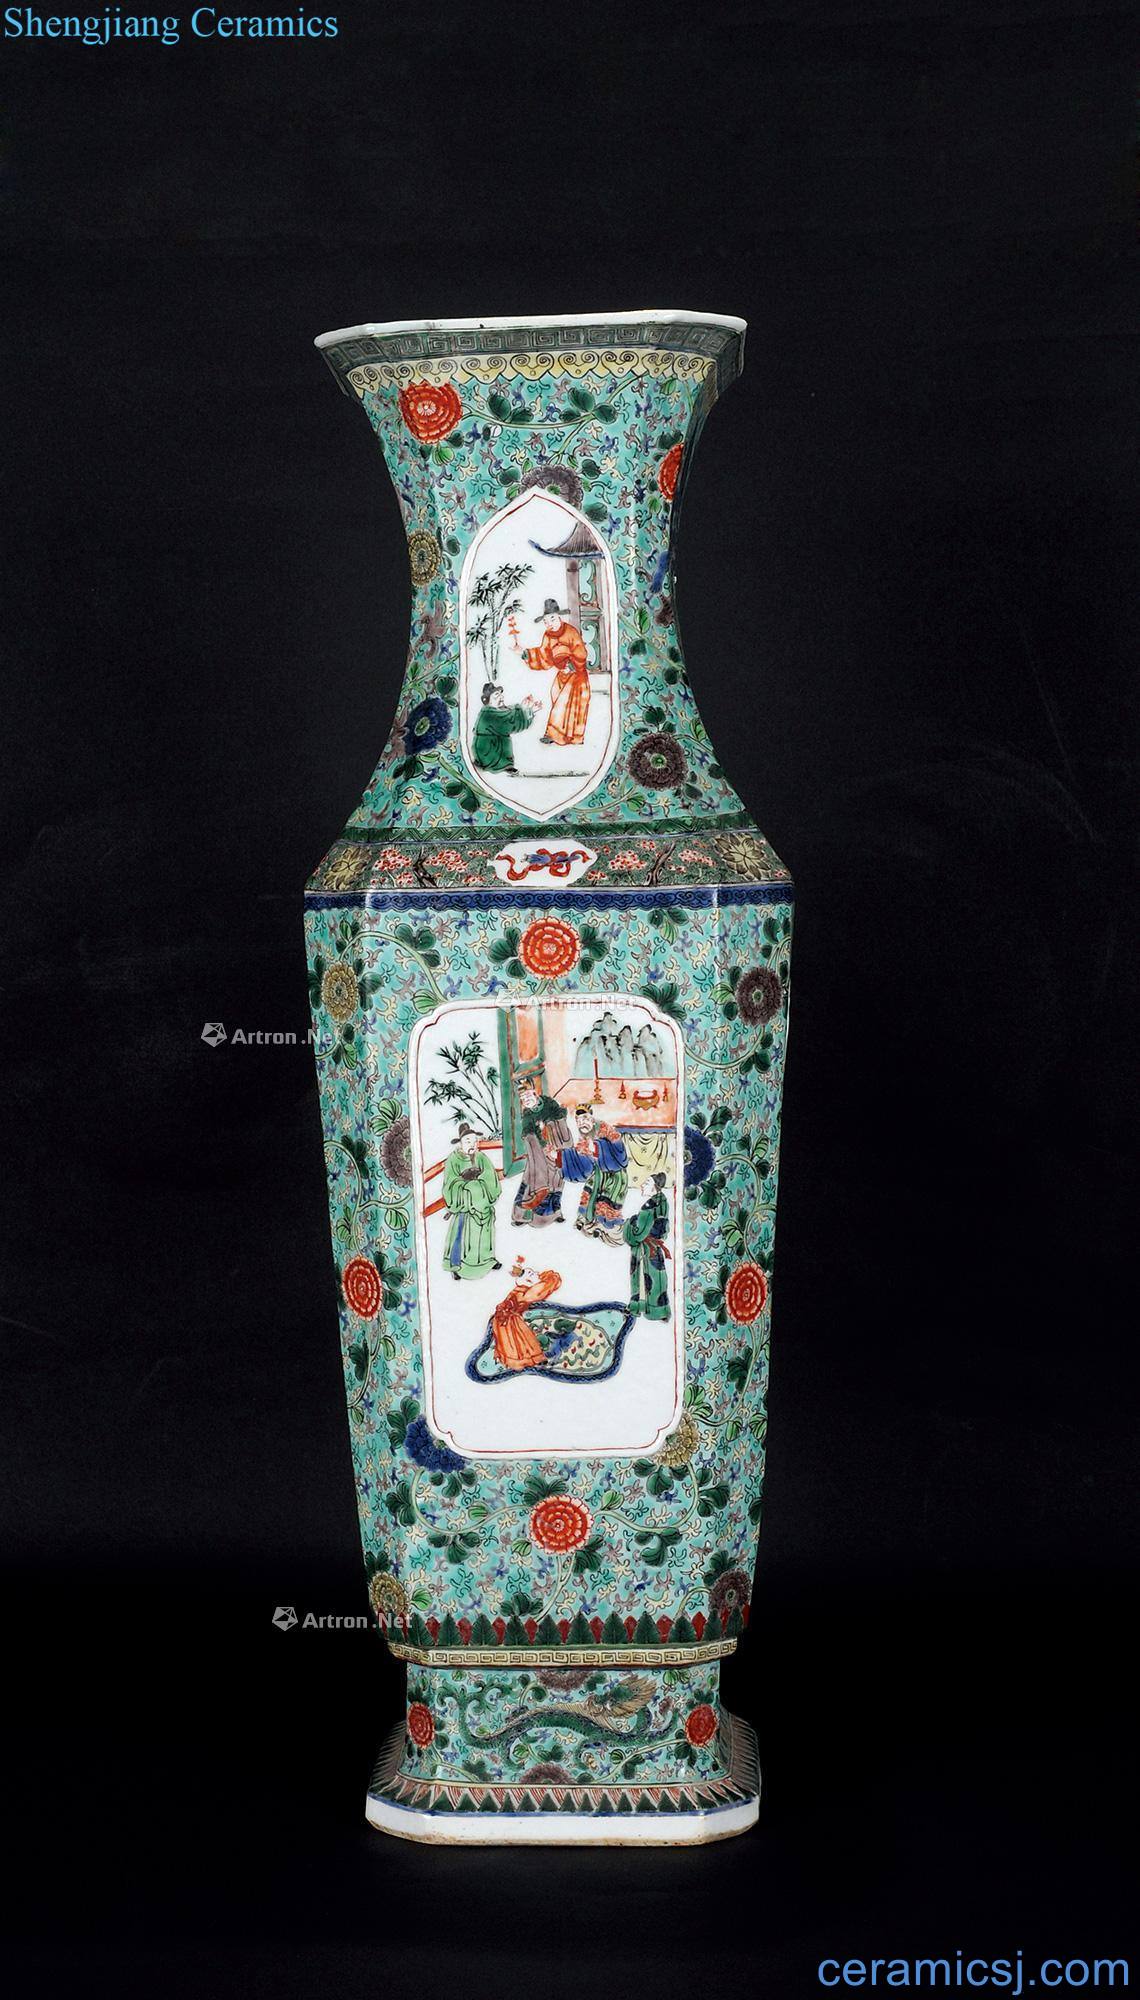 The qing emperor kangxi colorful stories of medallion figure bottles